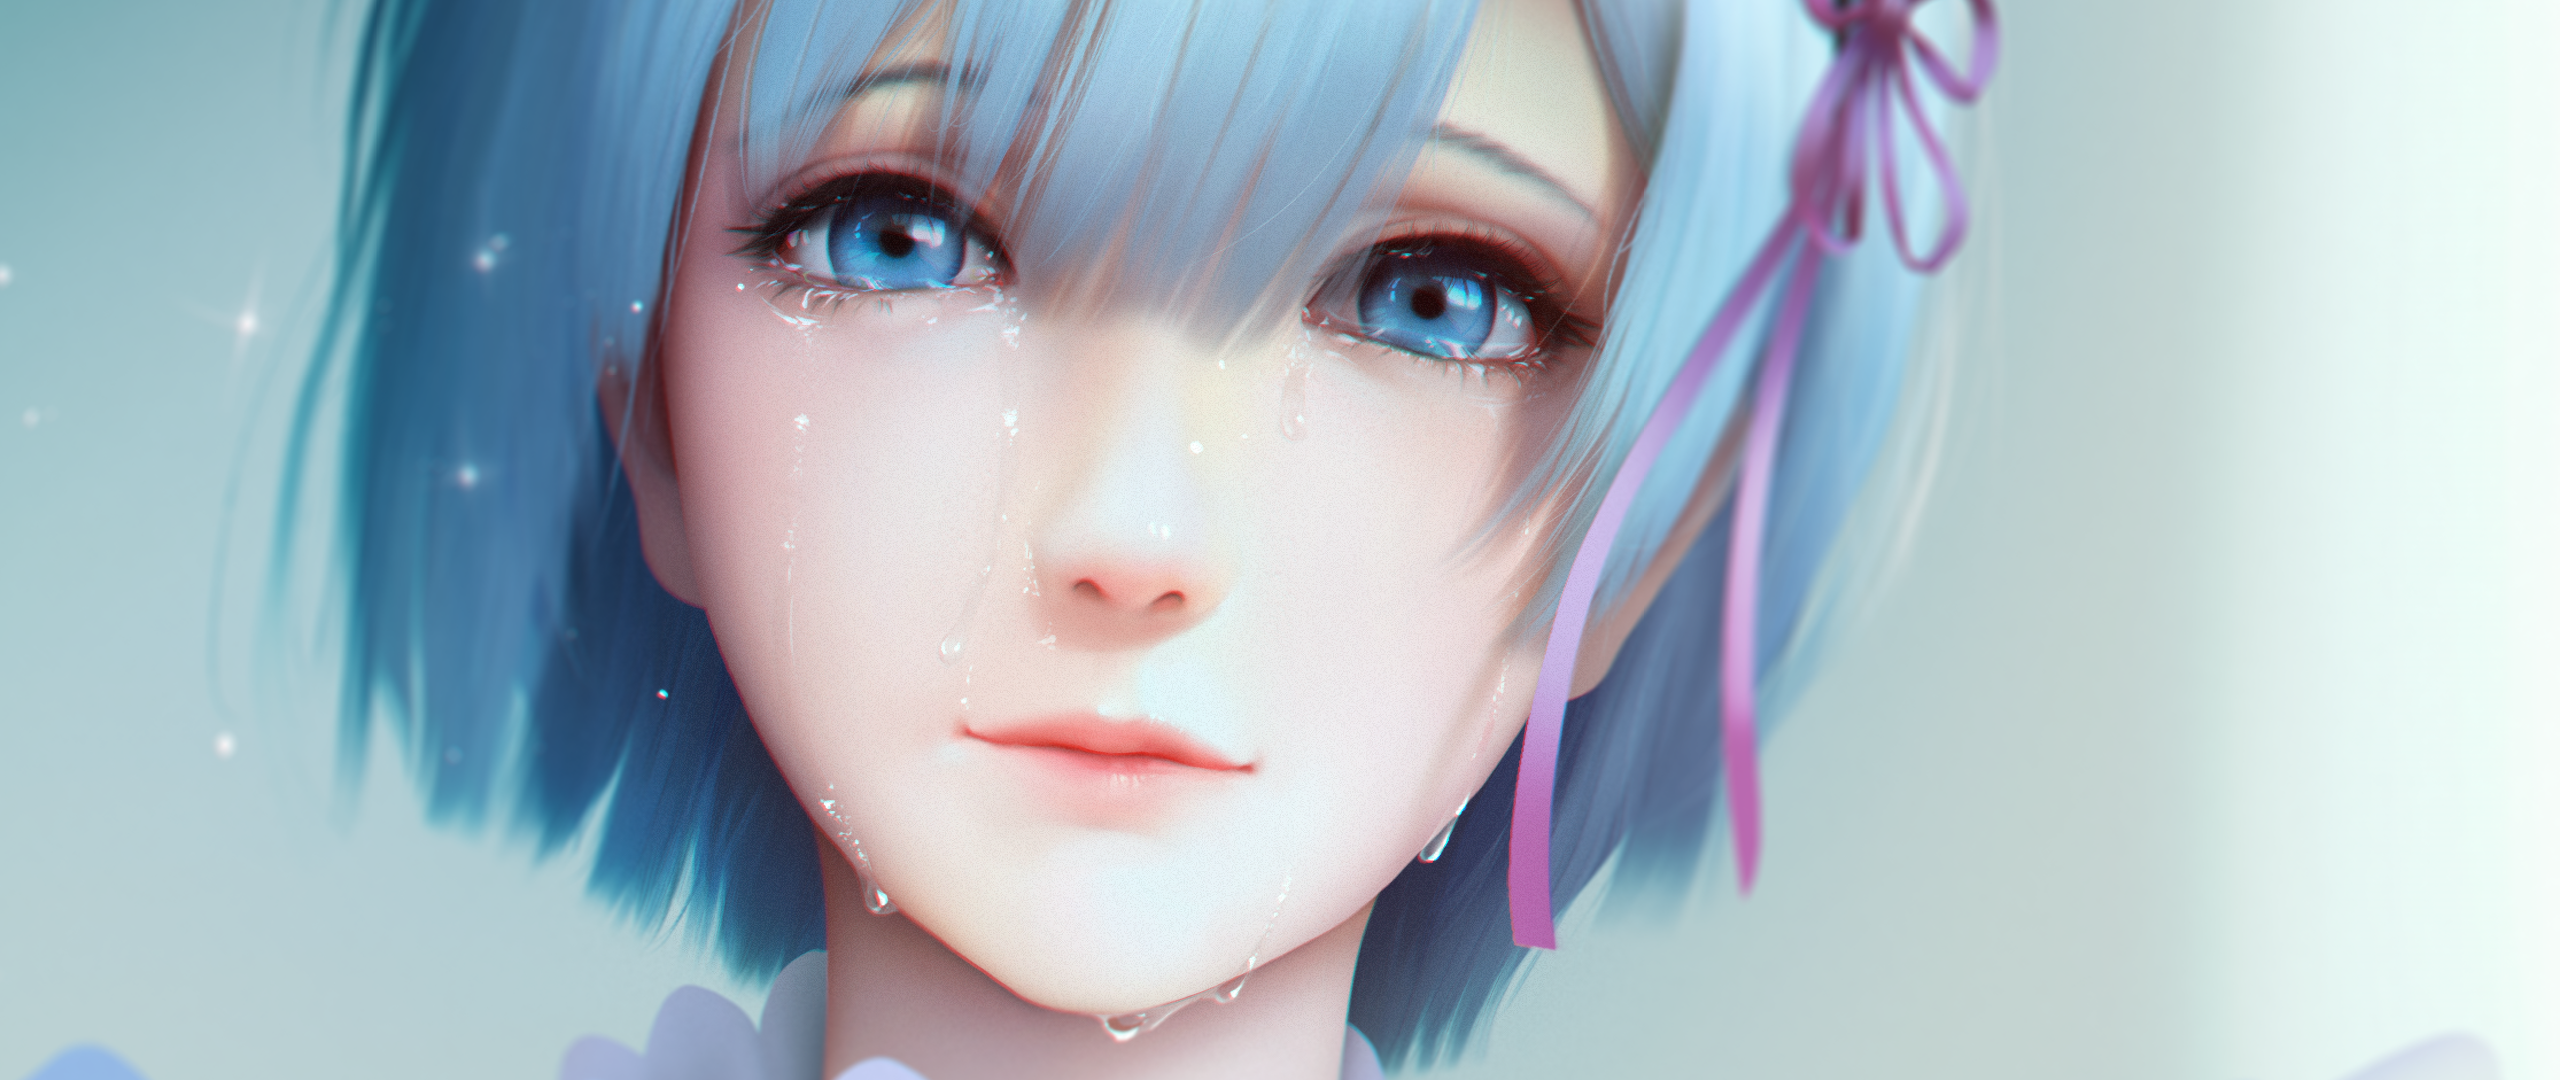 Wallpaper Sad Rem, Re - Anime Girl With Short Blue Hair , HD Wallpaper & Backgrounds